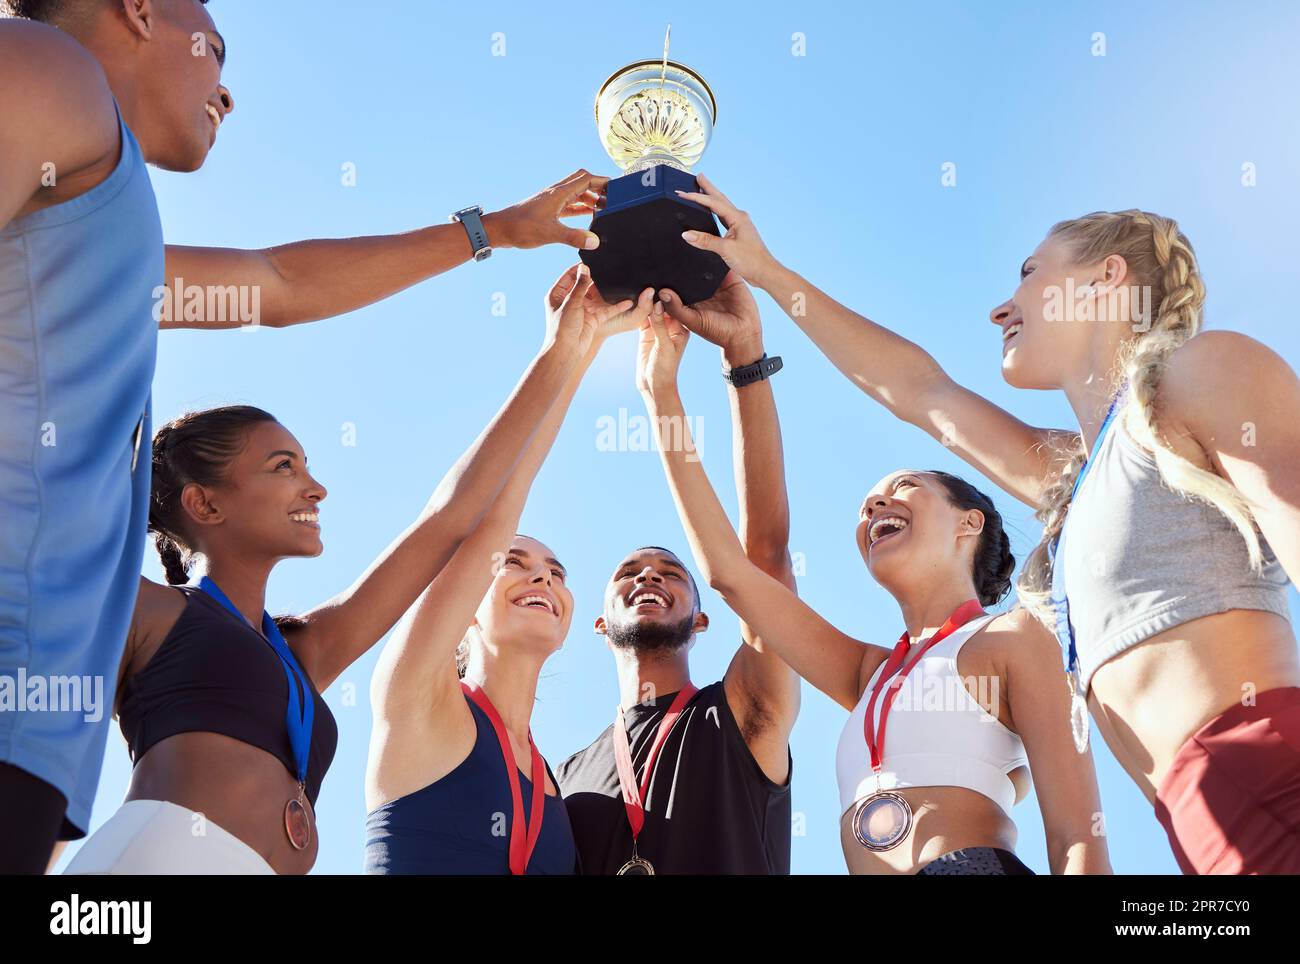 A diverse team of athletes celebrating a victory with a golden trophy and looking excited. A fit and happy team of professional athletes rejoicing after winning an award at an athletic sports event Stock Photo